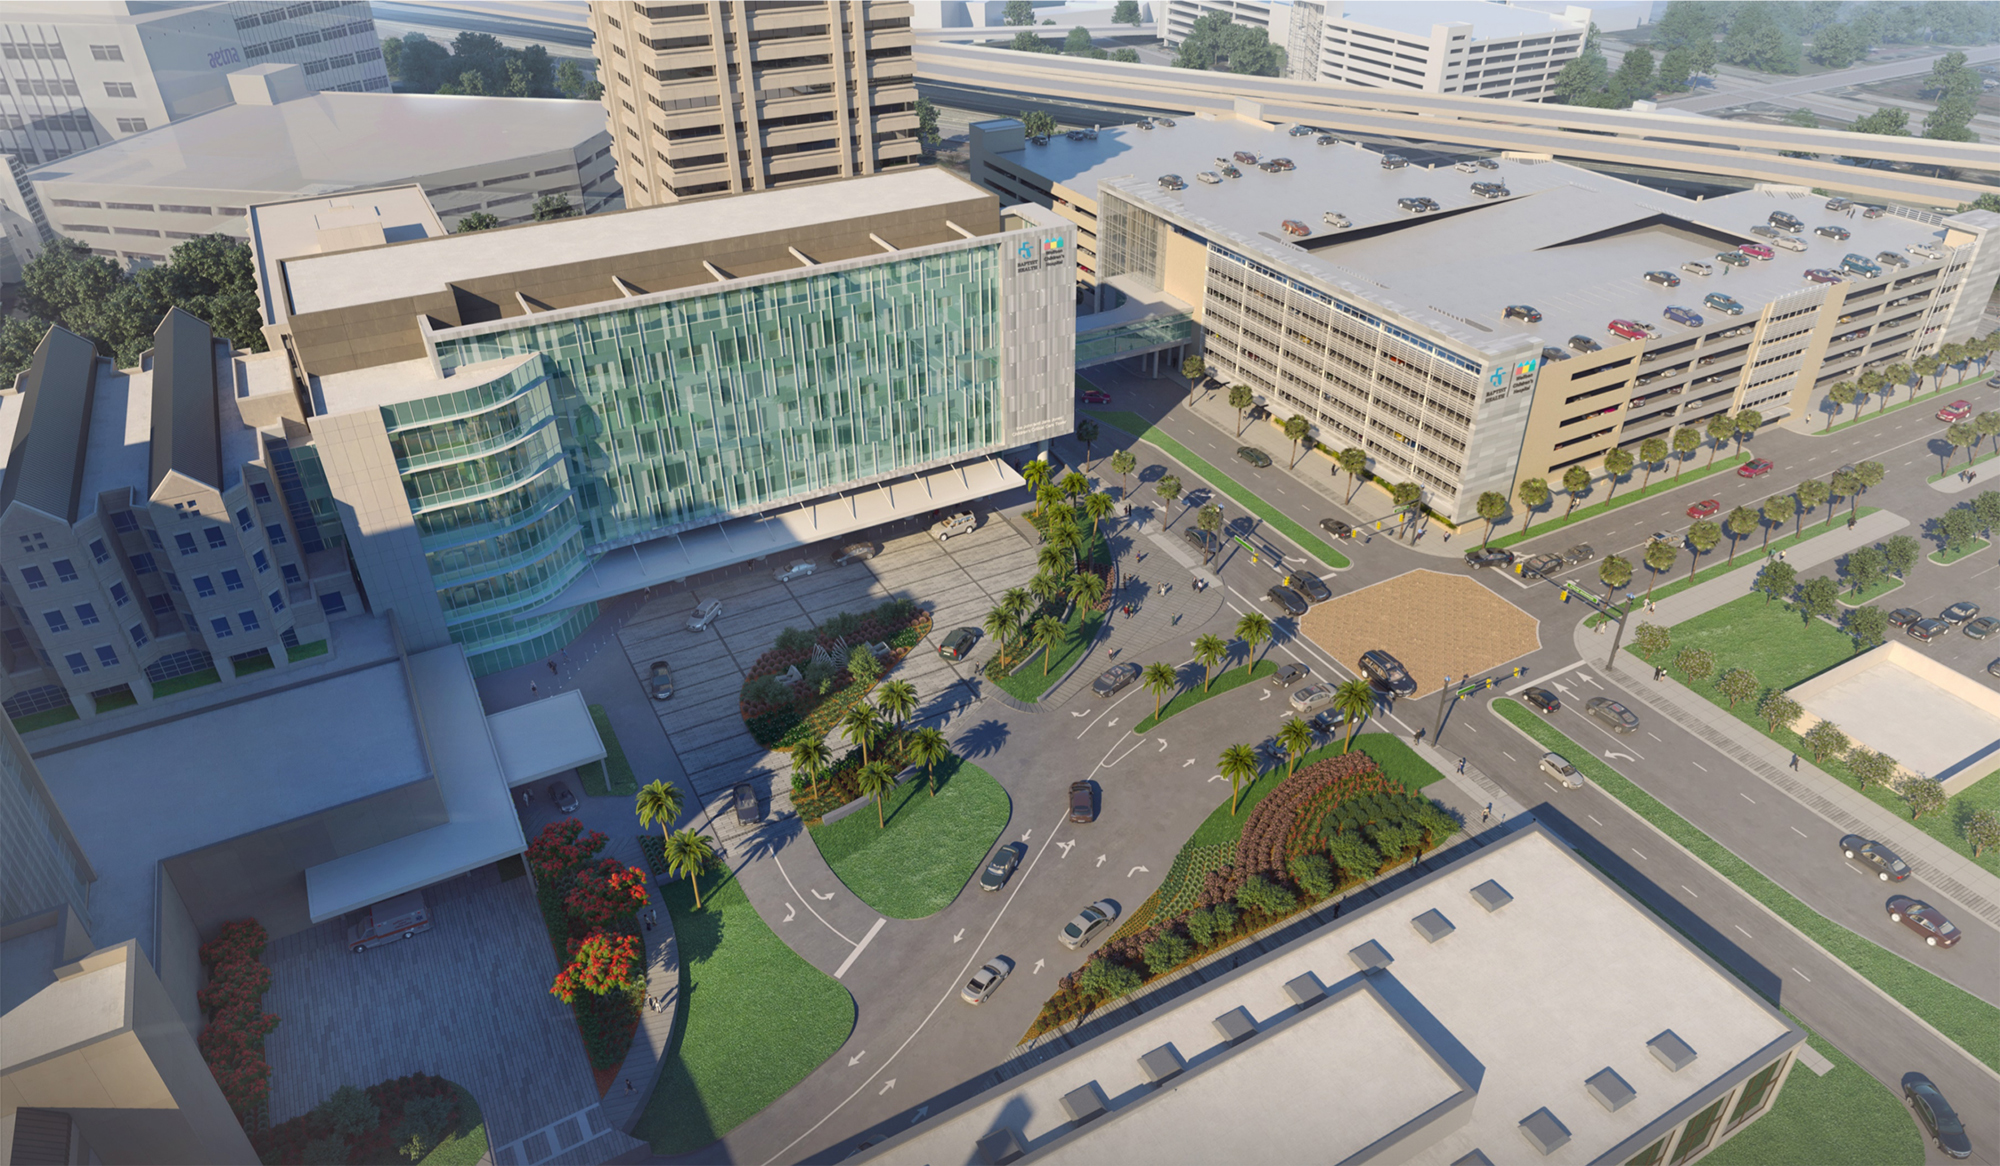 An artist's conception of the seven-story Wolfson Children’s Critical Care Tower.   The tower will become the front entrance to Wolfson Children’s Hospital and Baptist Medical Center Jacksonville.